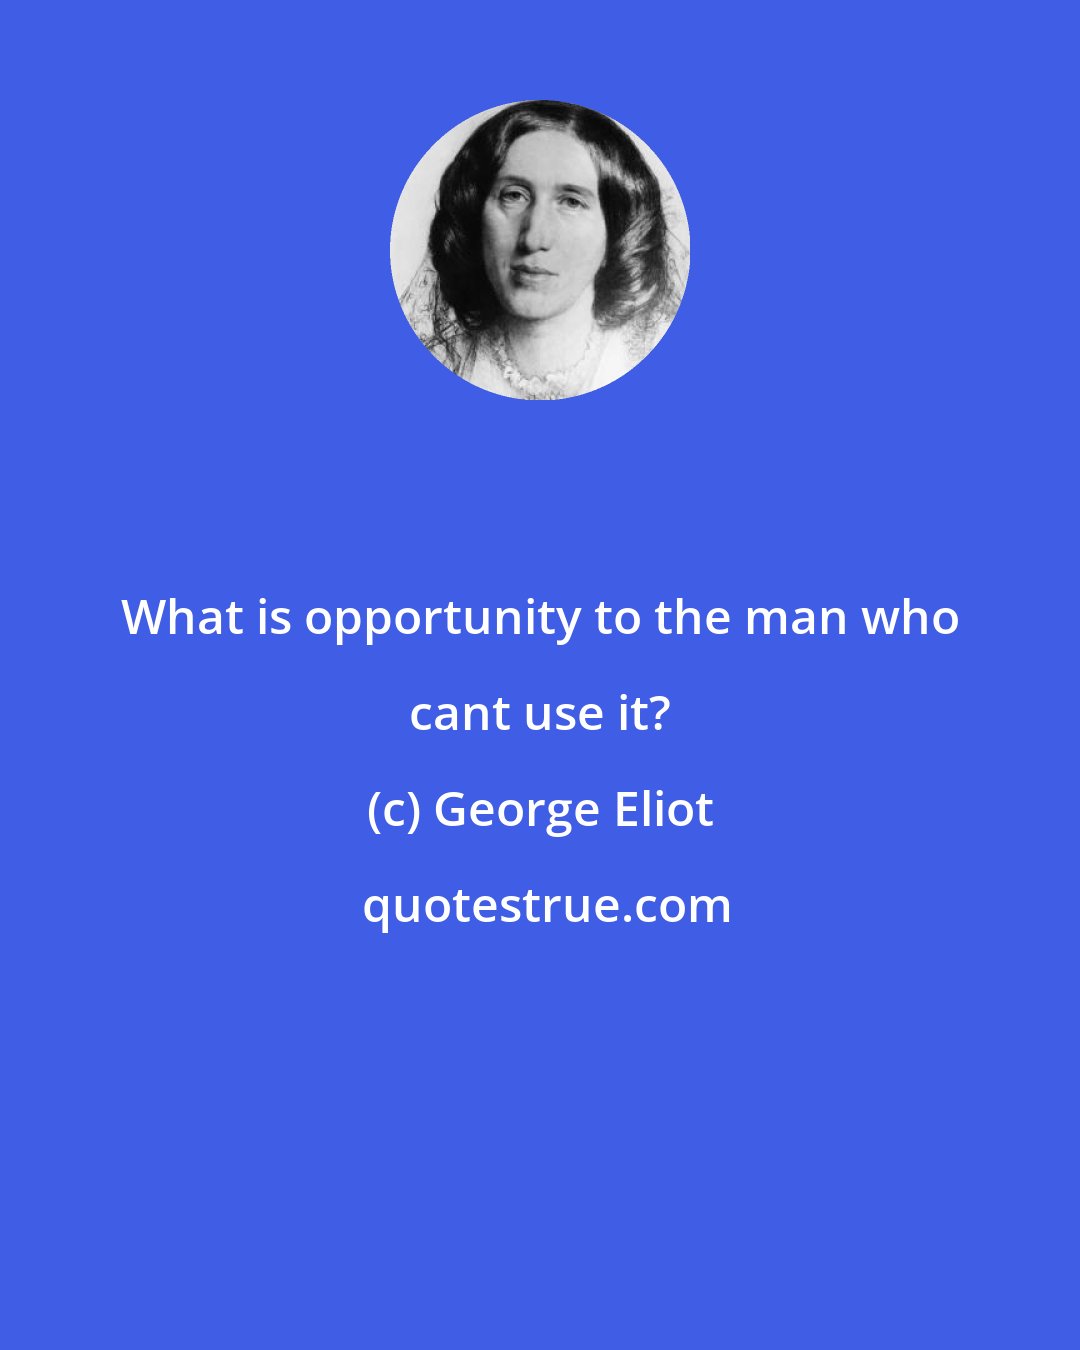 George Eliot: What is opportunity to the man who cant use it?